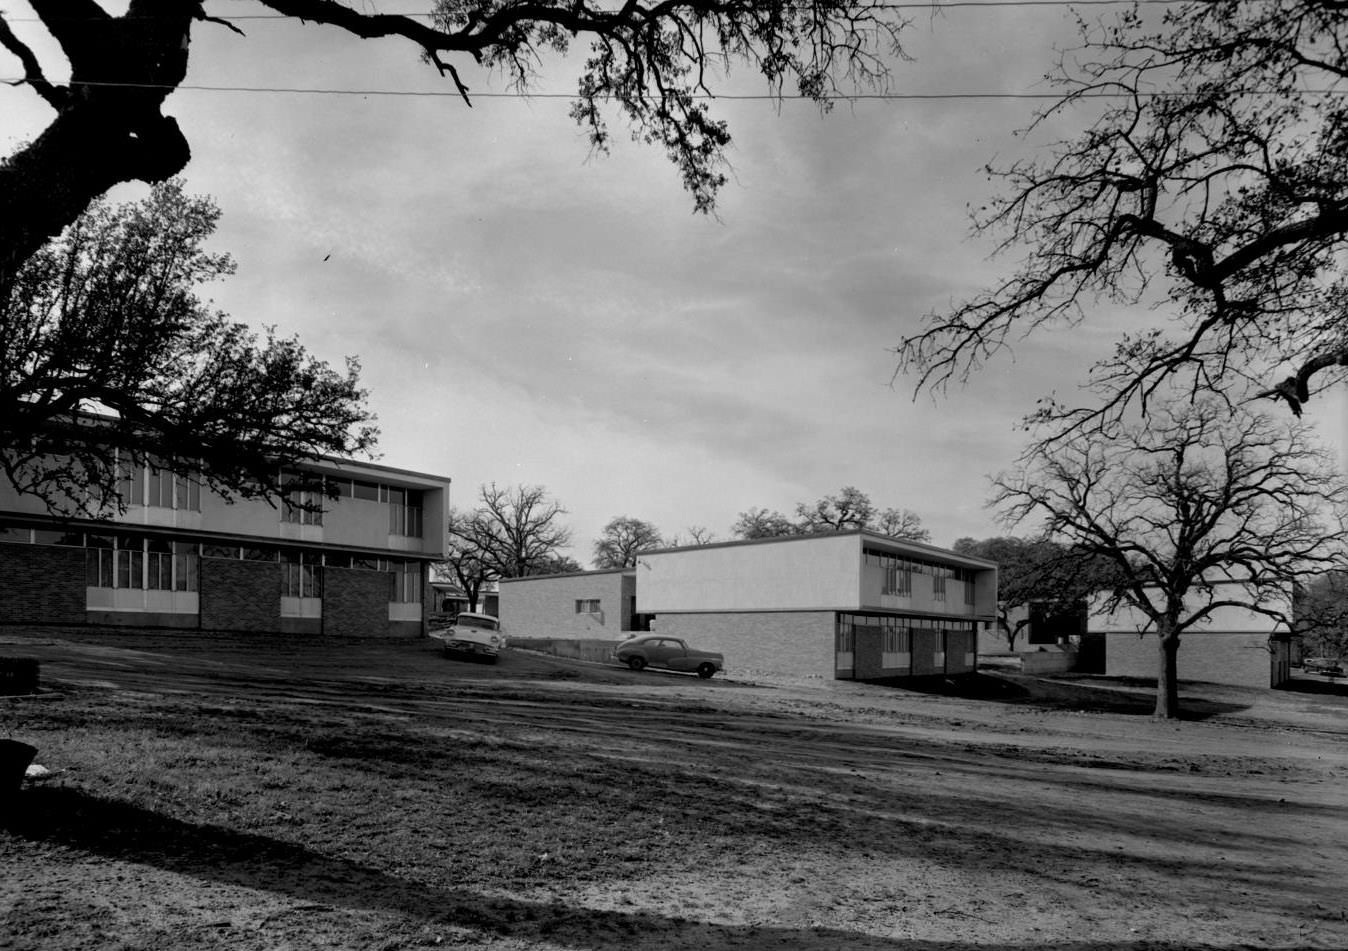 Housing Units and Grounds at Texas School for the Deaf, 1957.